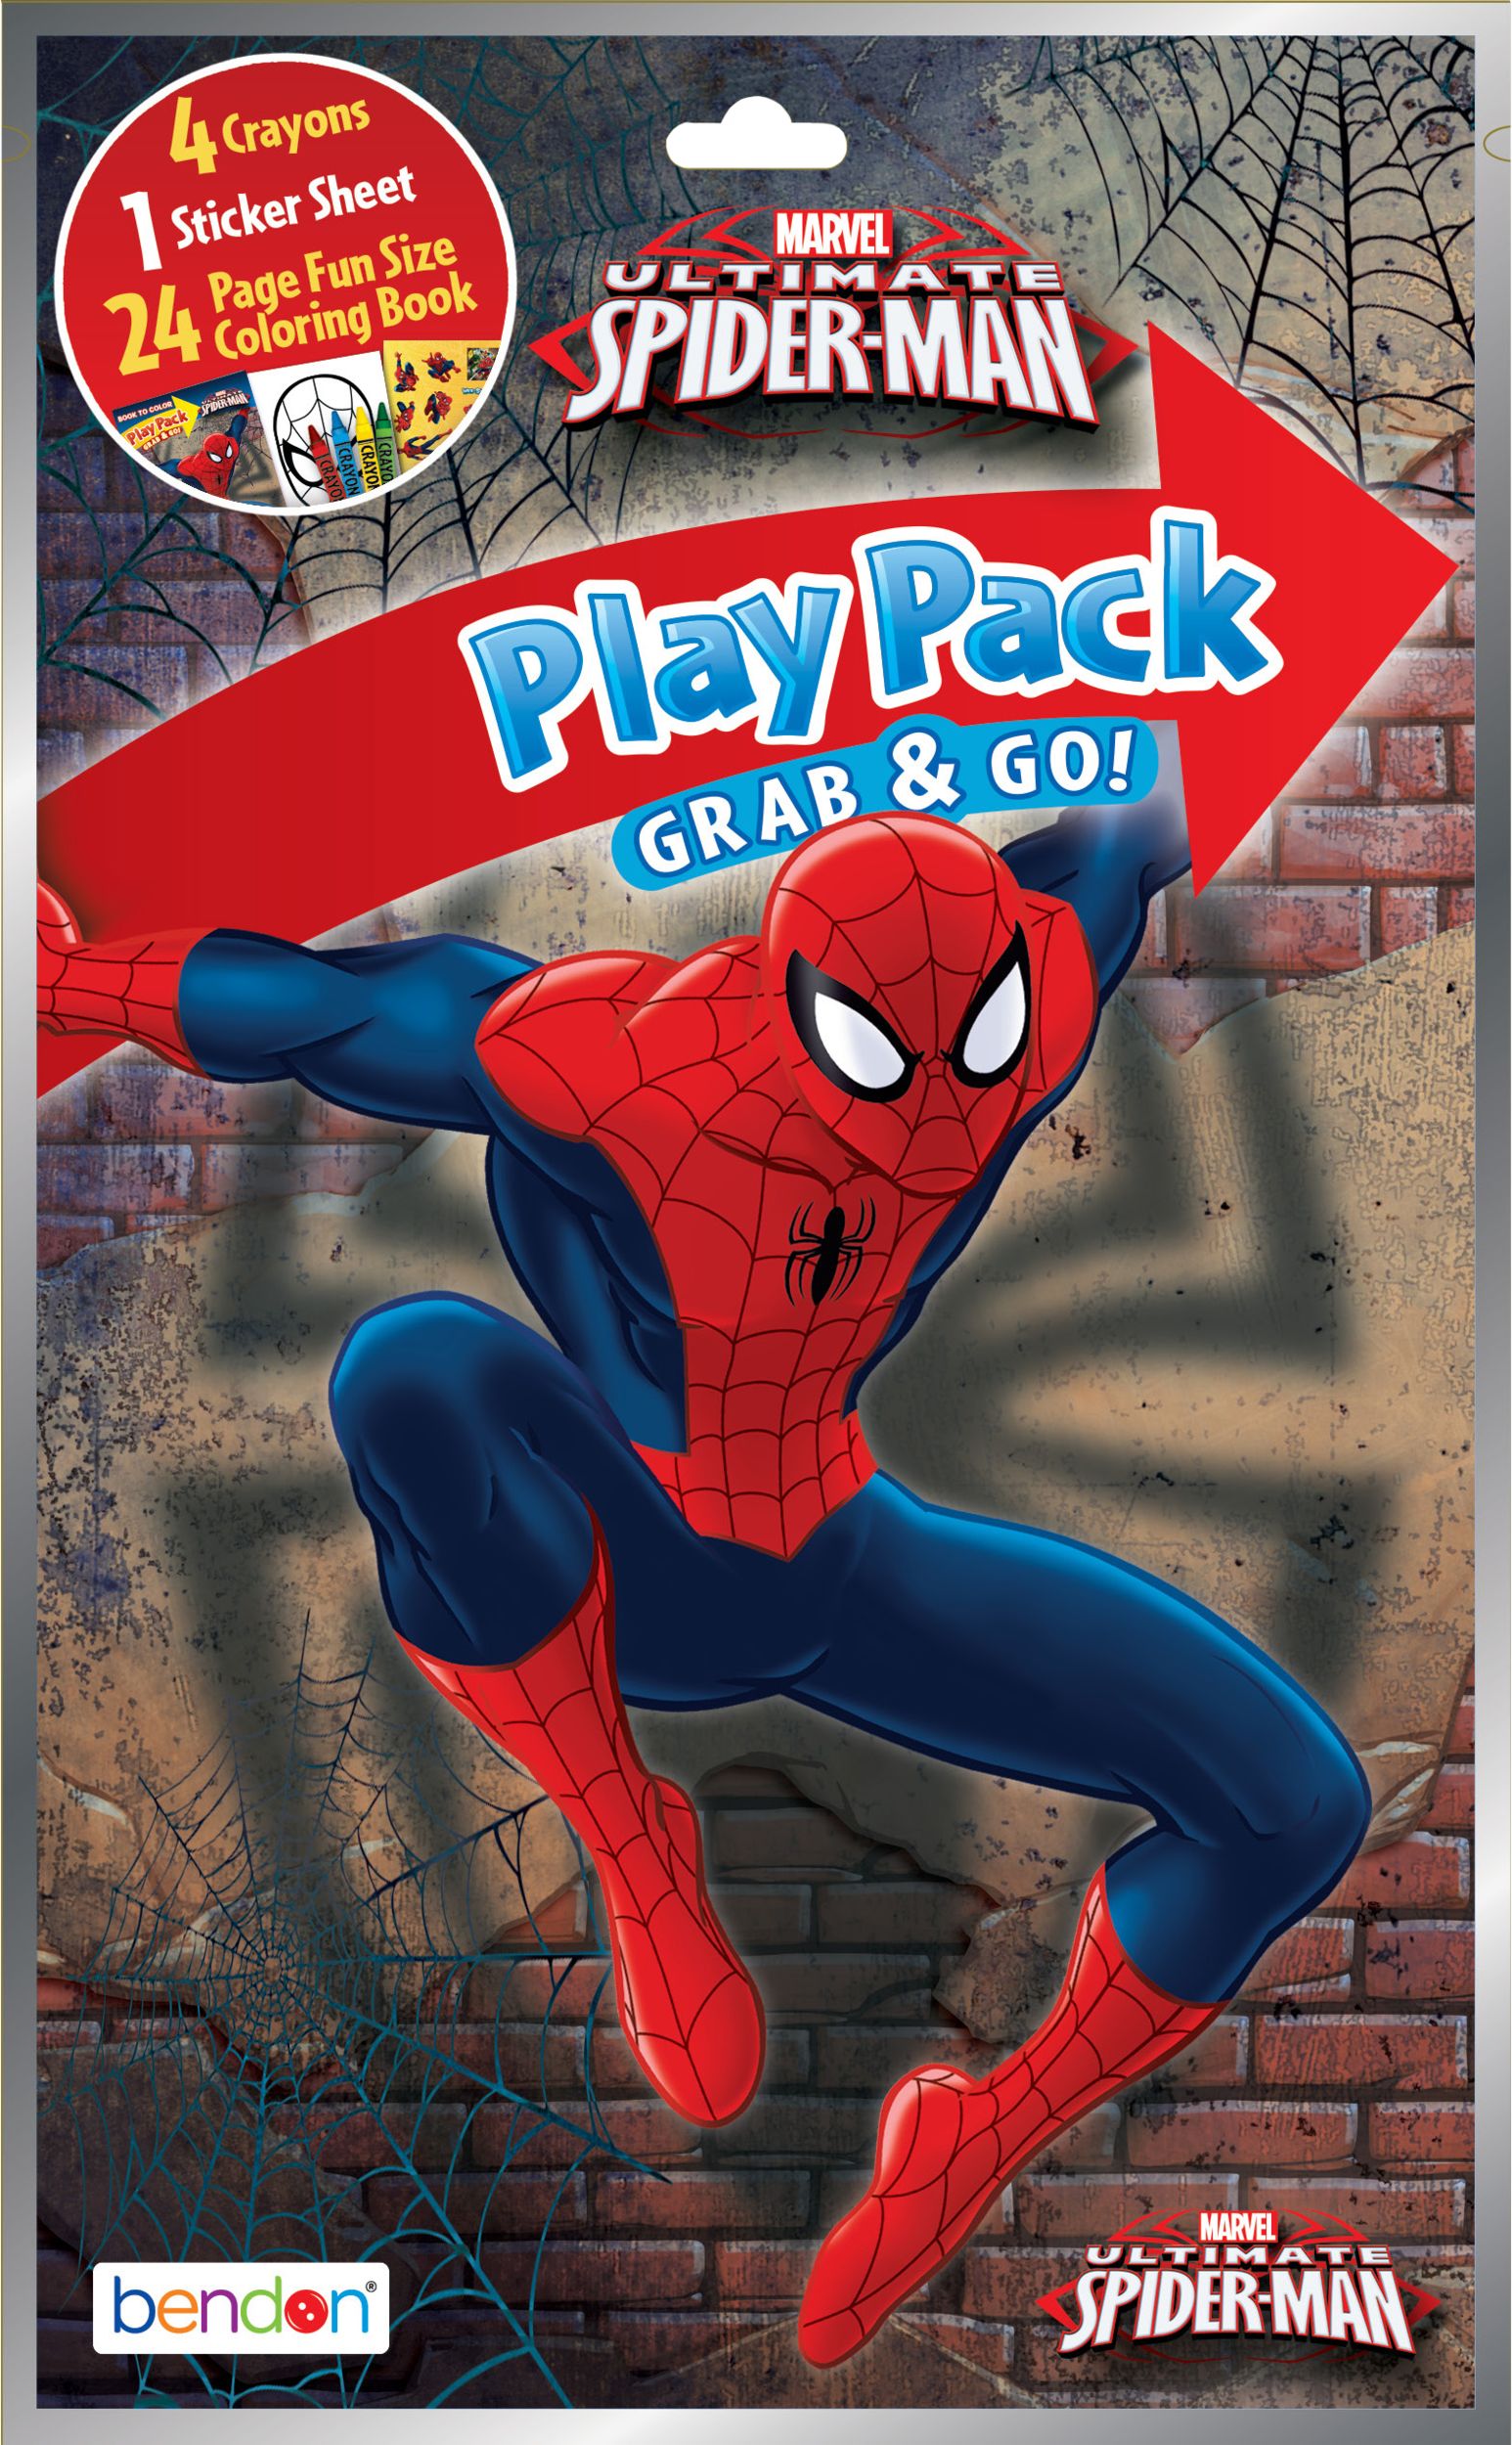 Spider-Man Grab & Go Play Pack